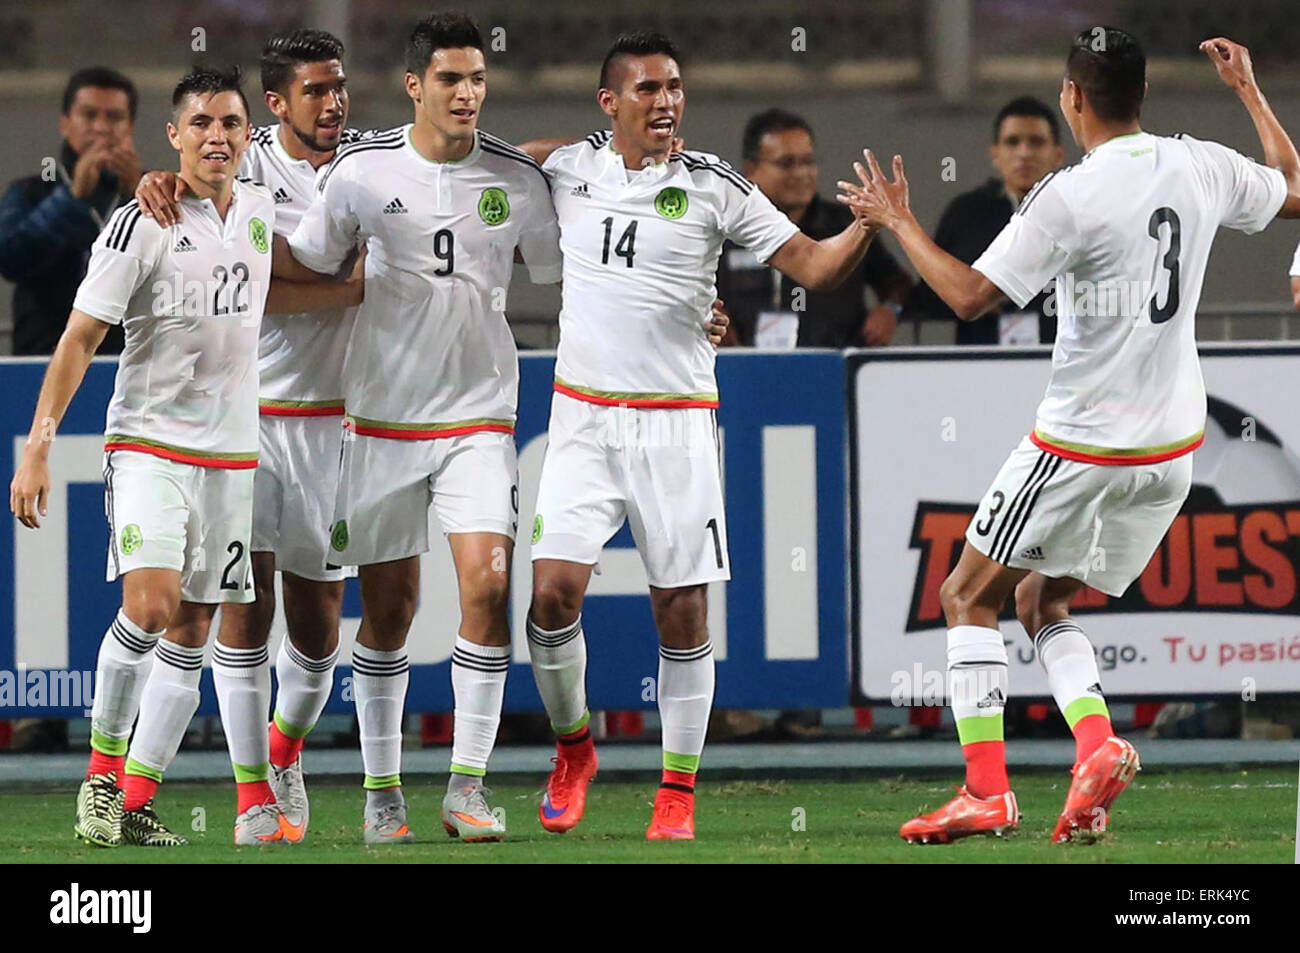 Lima, Peru. 3rd June, 2015. Mexico's Juan Carlos Valenzuela (2nd R) celebrates scoring with his teammates during an international friendly soceer match between Mexico and Peru, in Lima, Peru, on June 3, 2015. Mexico and Peru played the match on Wednesday in preparation for the upcoming 2015 Copa America, which will be held from June 11 to July 4 in Chile. © Juan Carlos Guzman/Xinhua/Alamy Live News Stock Photo